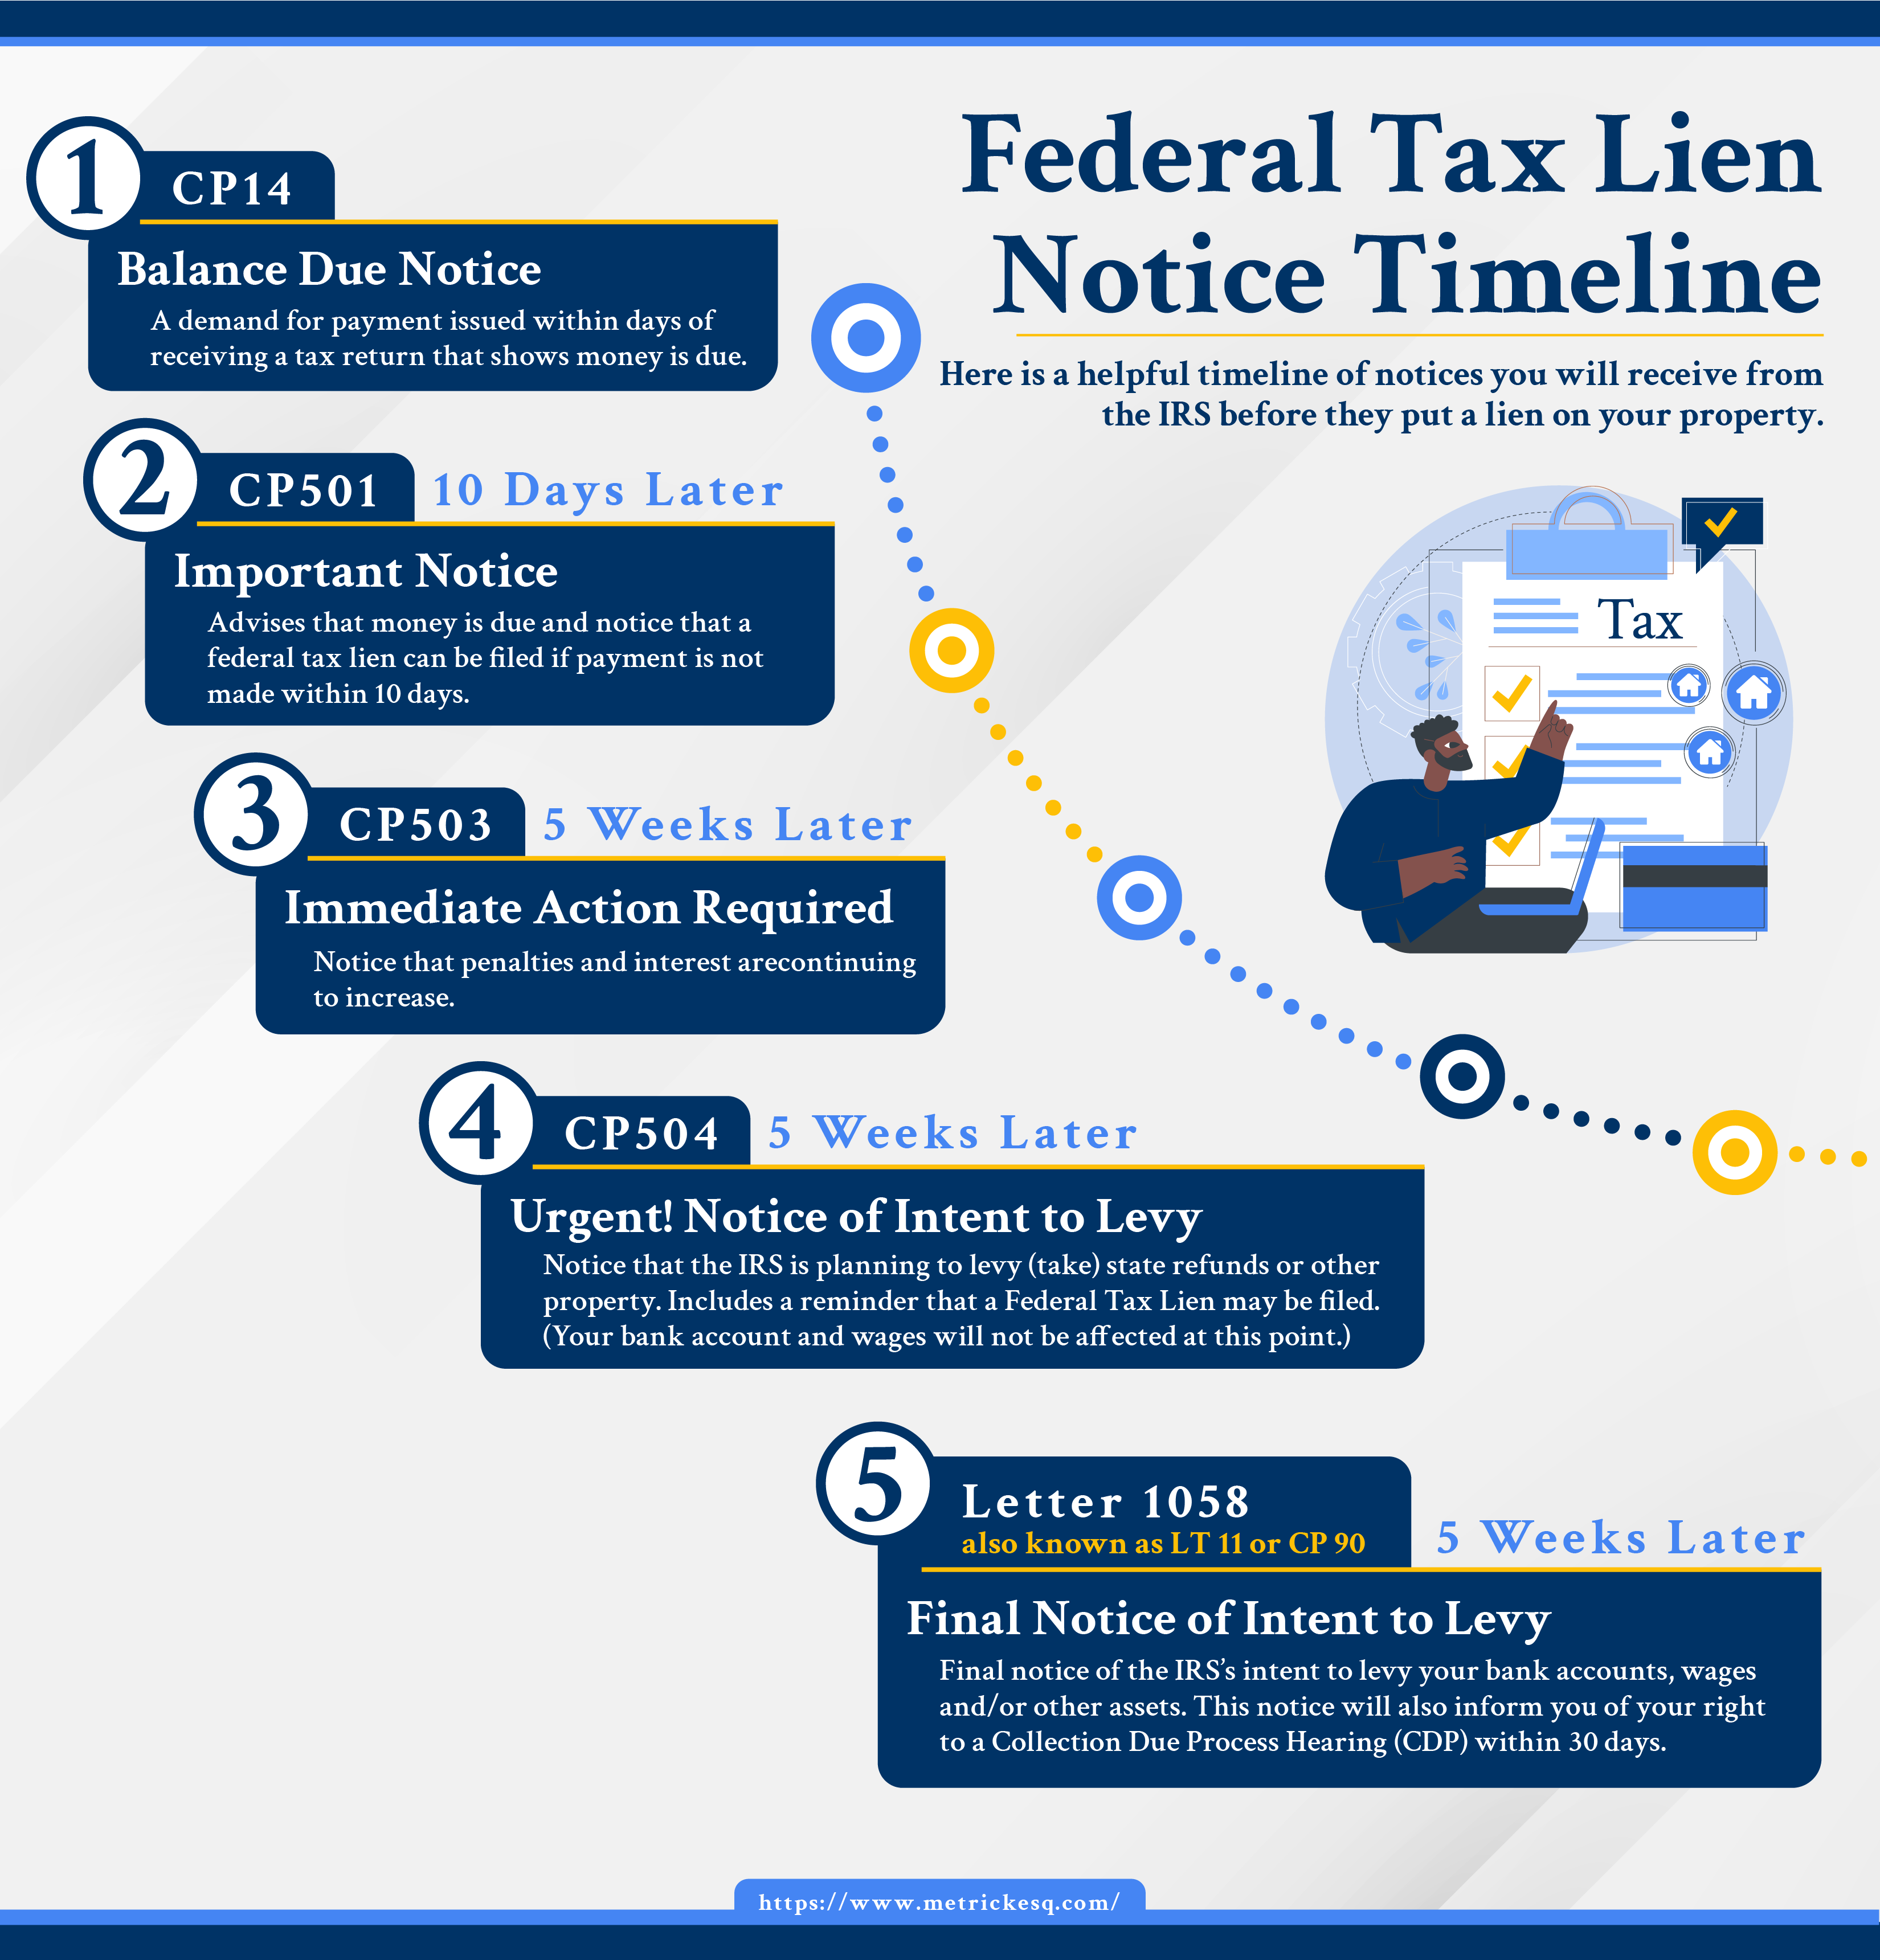 Federal Tax Lien Important Notices Timeline | Federal Tax Lien Resolution Services | Ira J. Metrick, Esq.